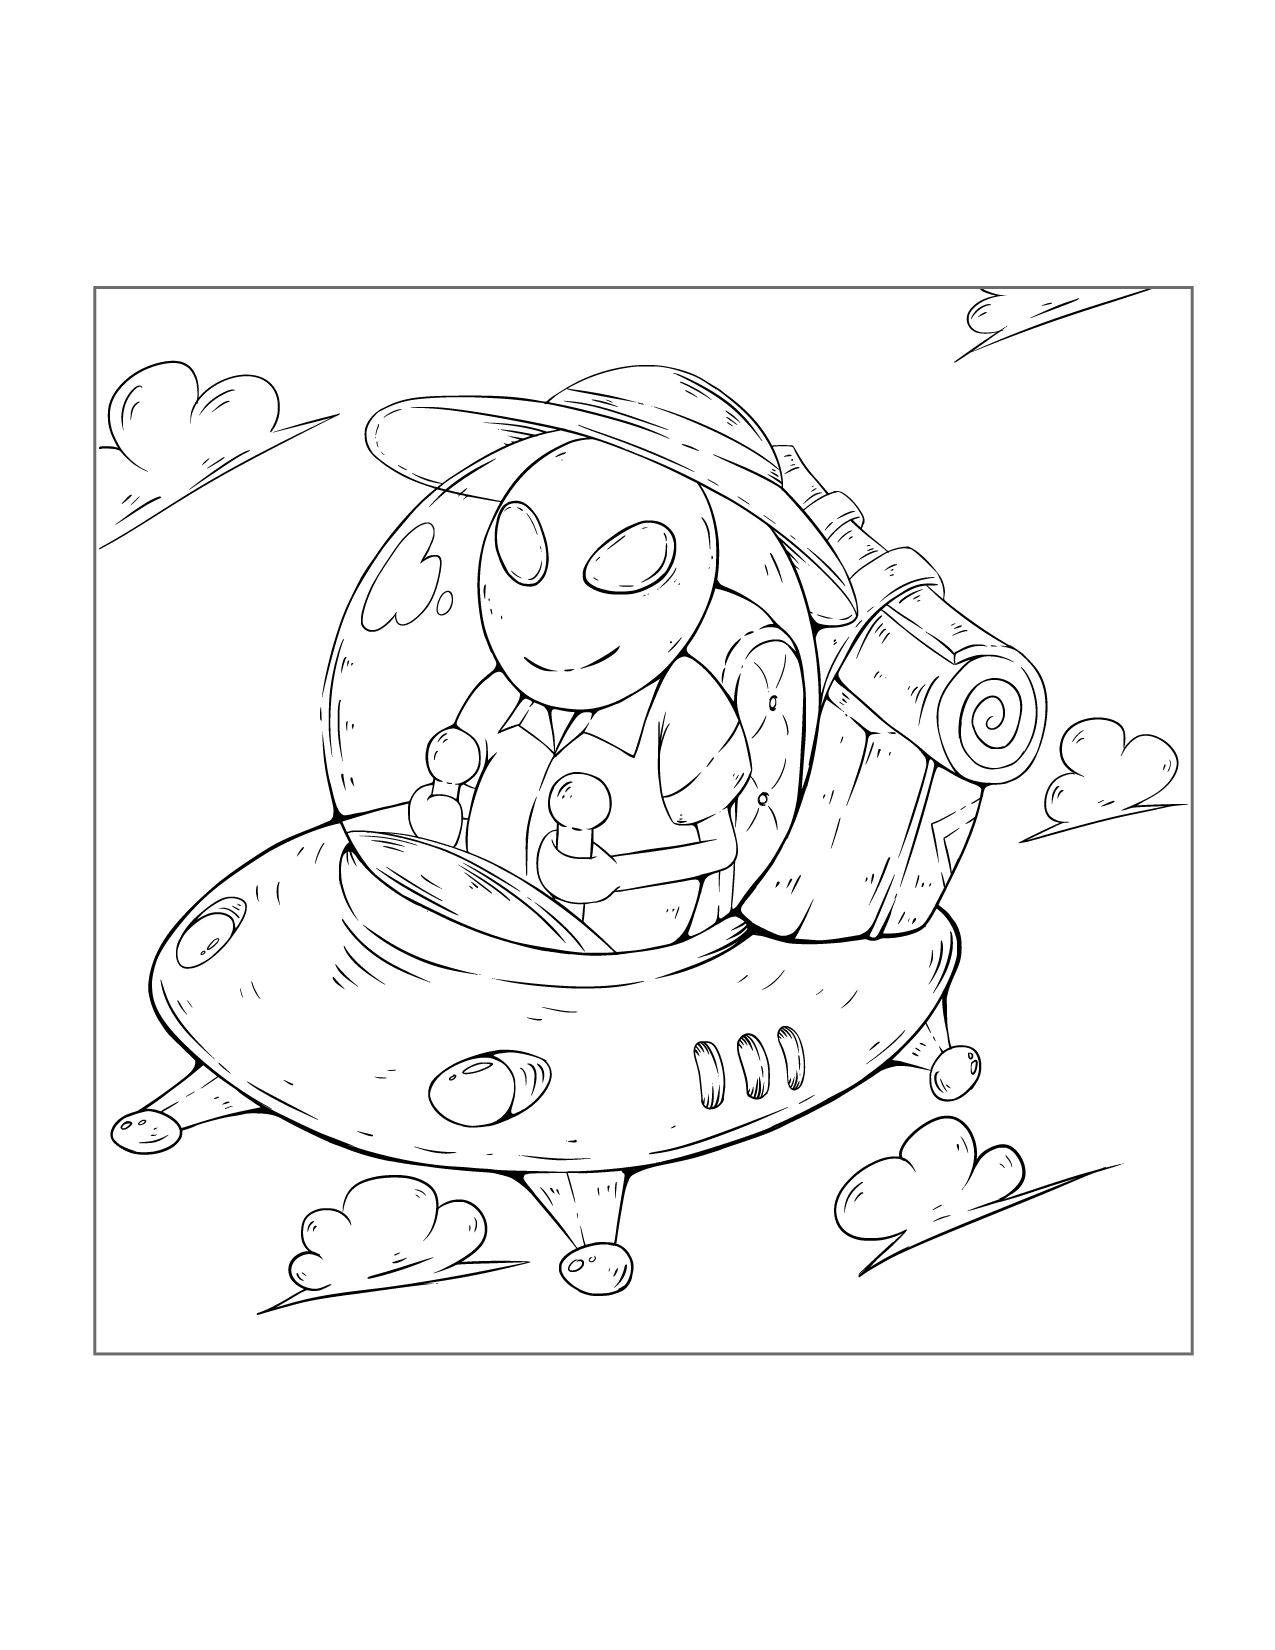 Alien Driving Space Ship Coloring Page